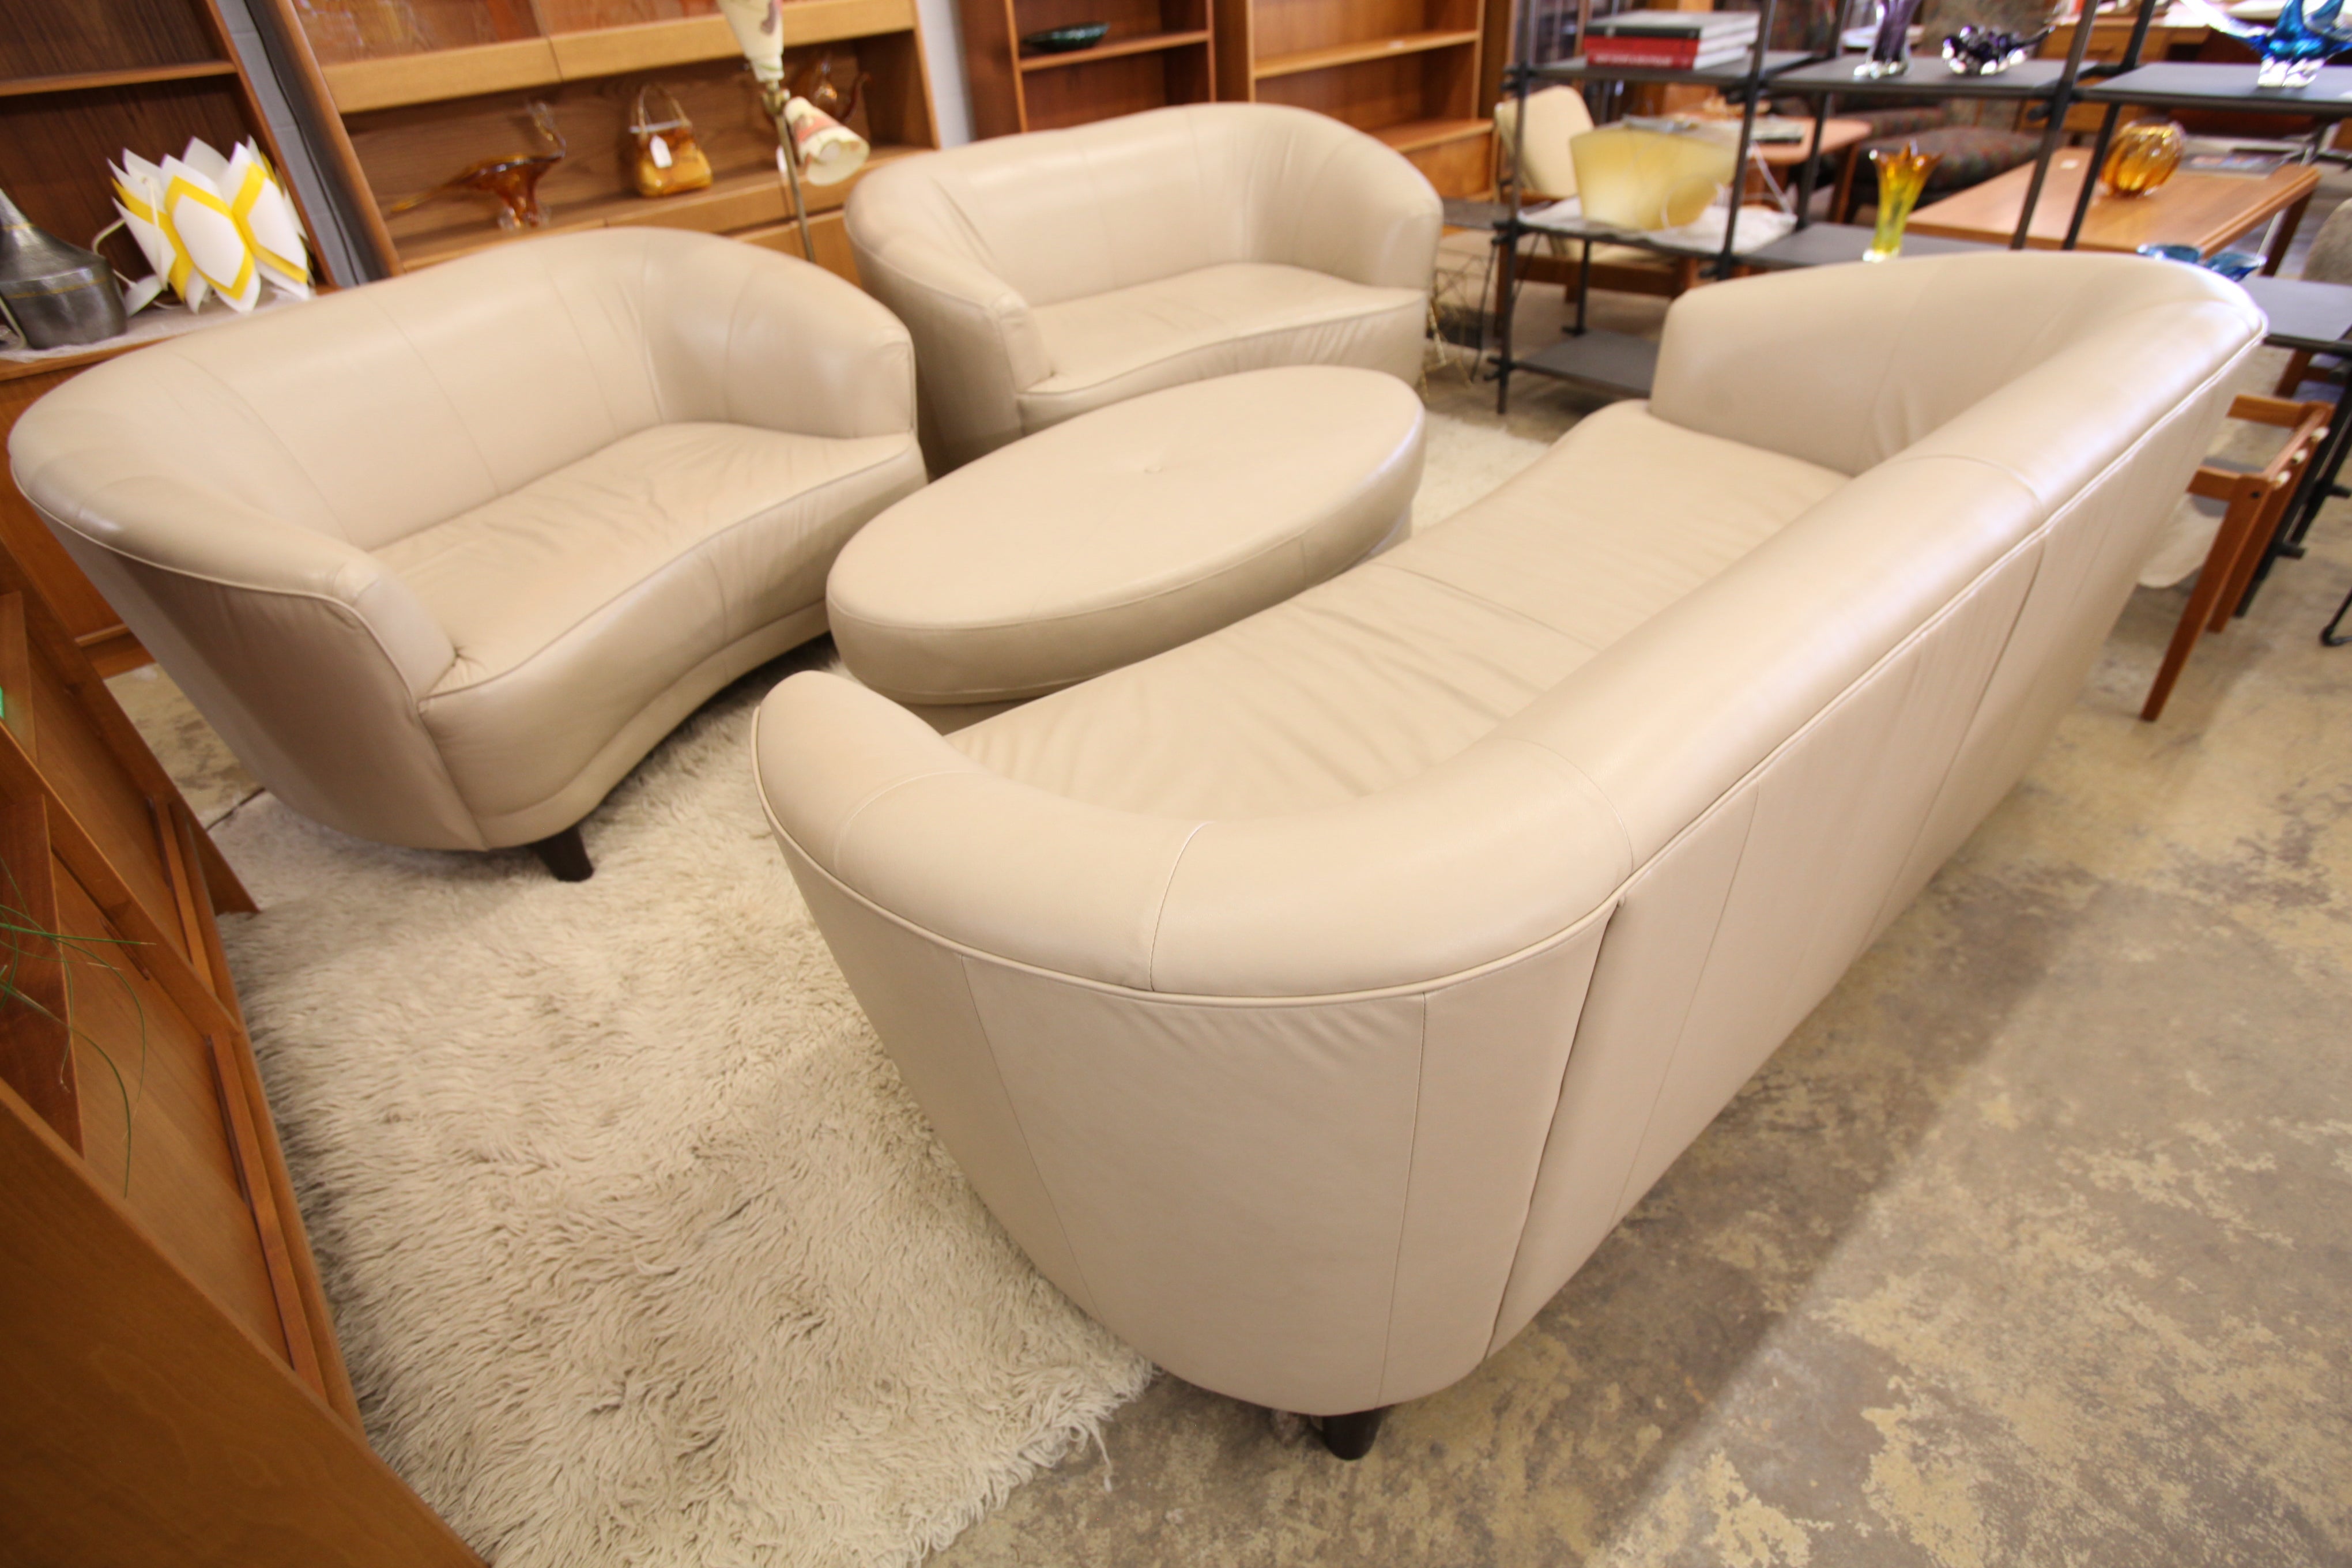 Oval Ottoman in Beige Leather (53" x 29" x 17"H)